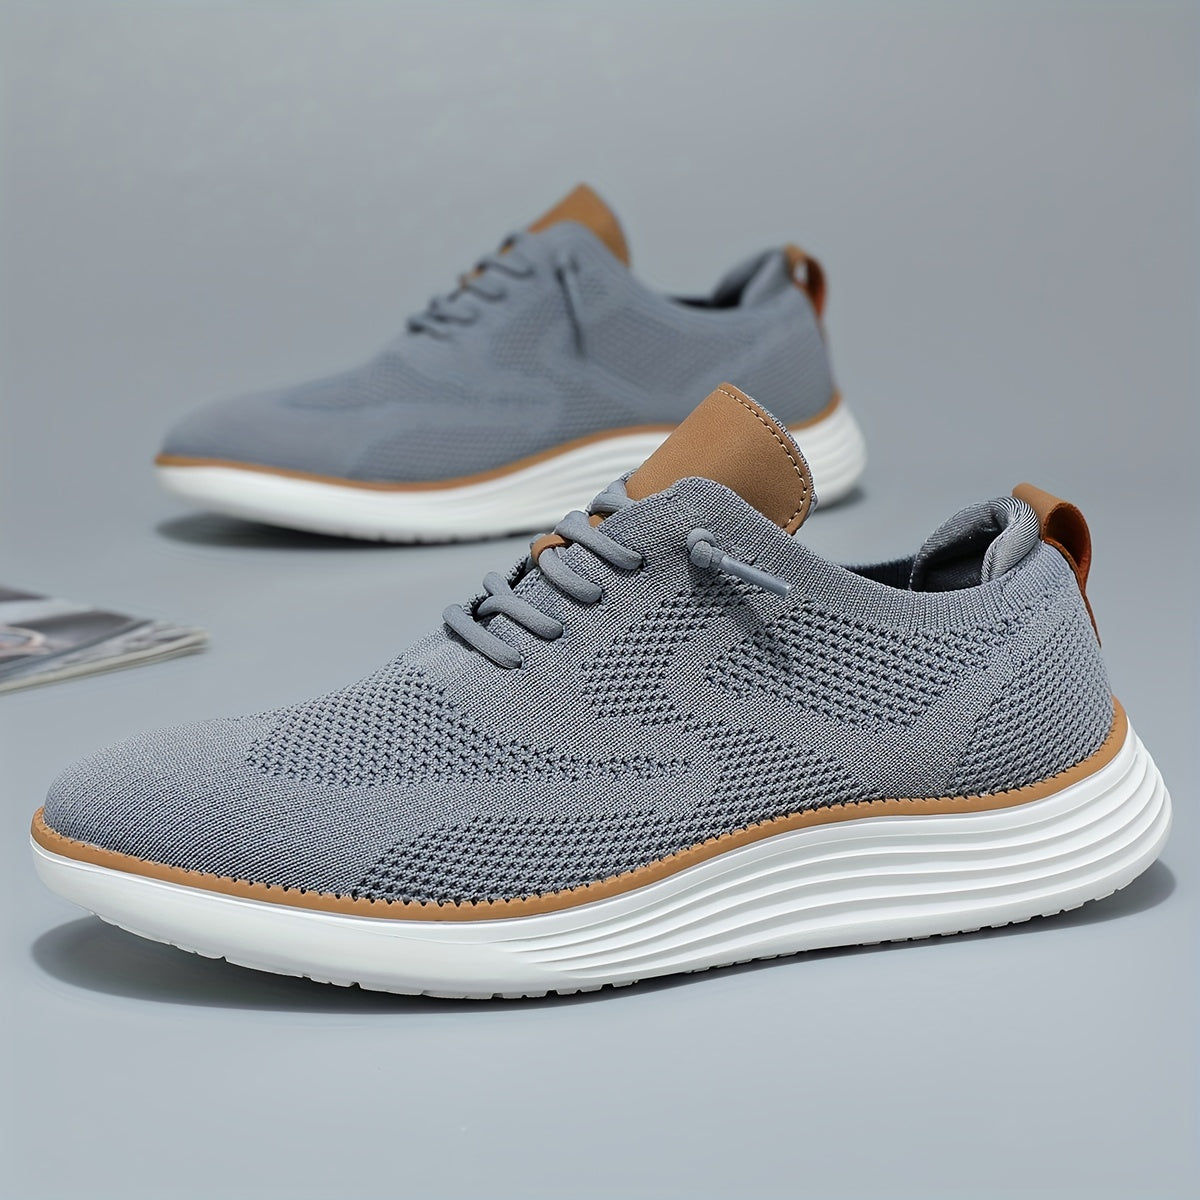 Men's Lightweight Athletic Sneakers - Breathable Lace-Up Shoes